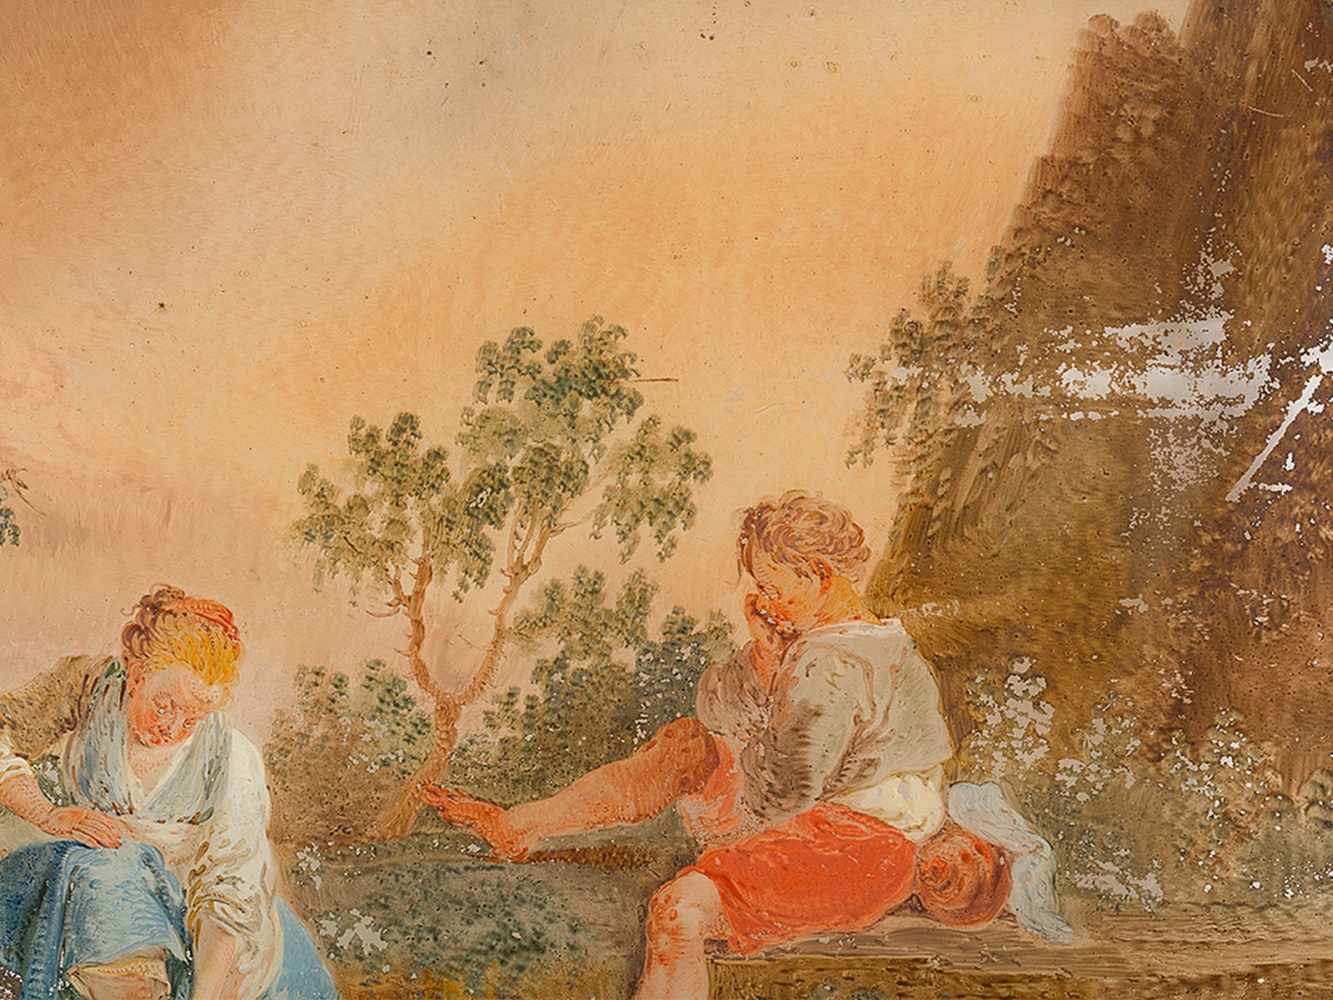 Children By the River, Reverse Glass Painting, French, 18th C. - Image 4 of 9